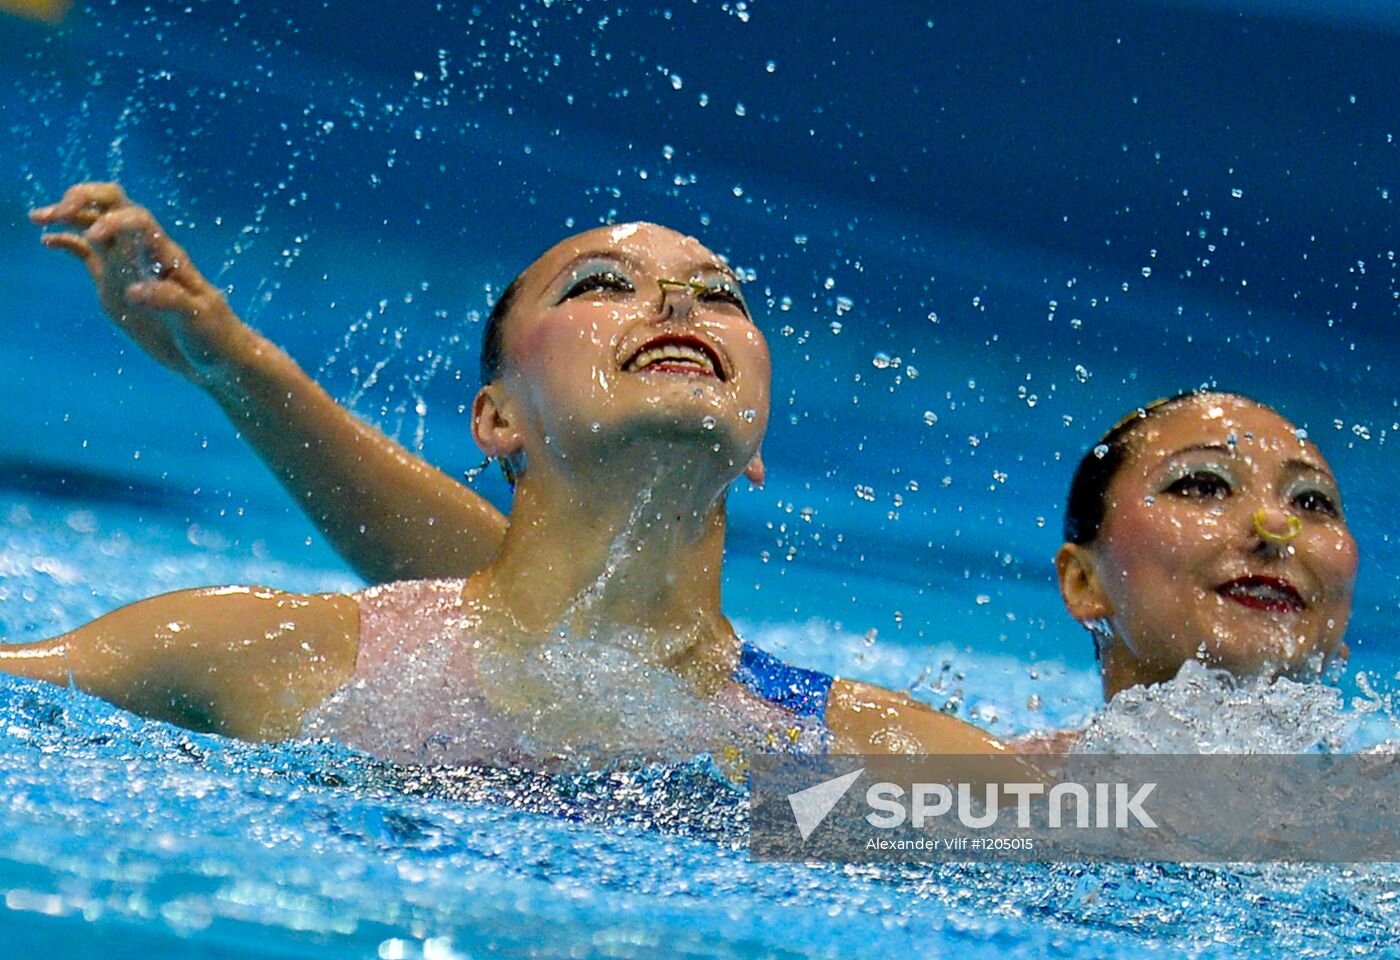 2012 Olympics. Women's Duets. Synchronised Swimming Free Routine